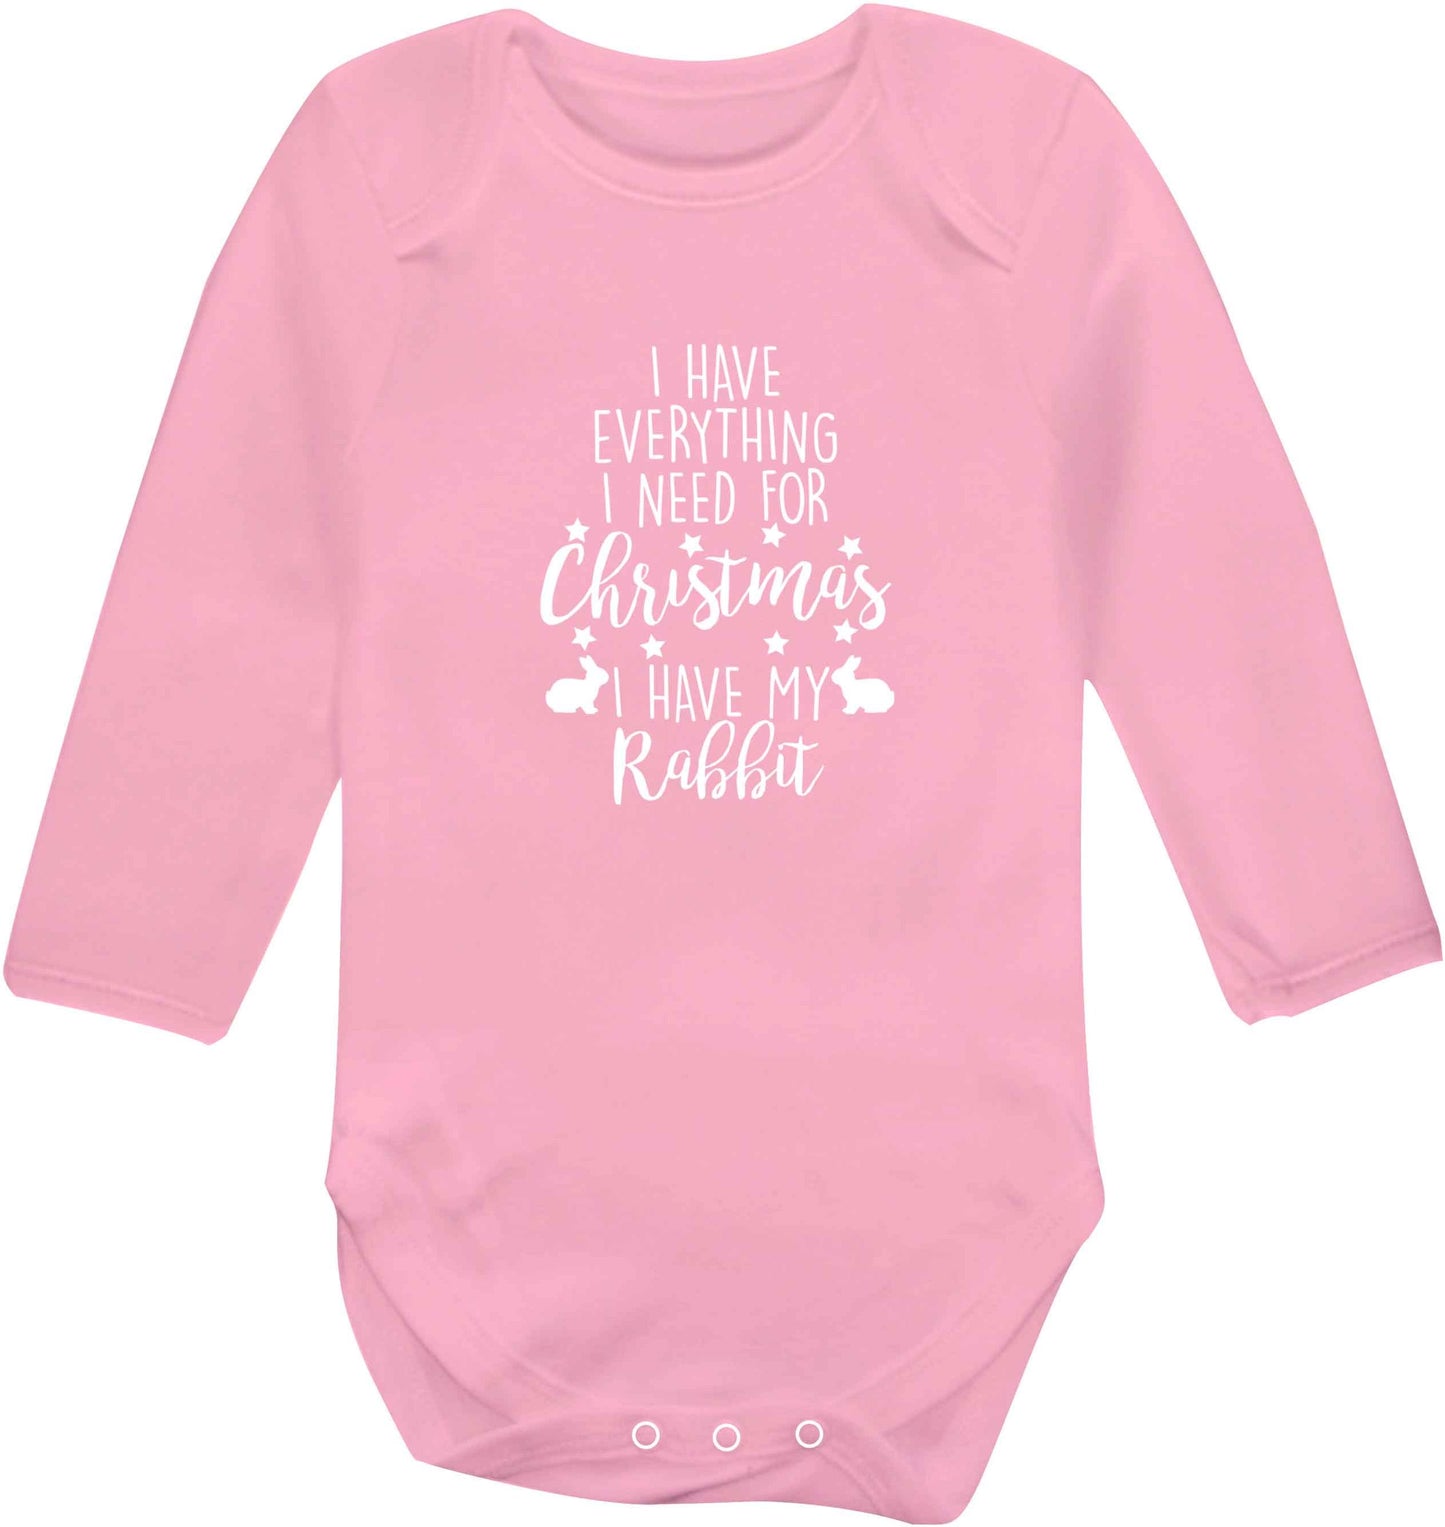 I have everything I need for Christmas I have my rabbit baby vest long sleeved pale pink 6-12 months